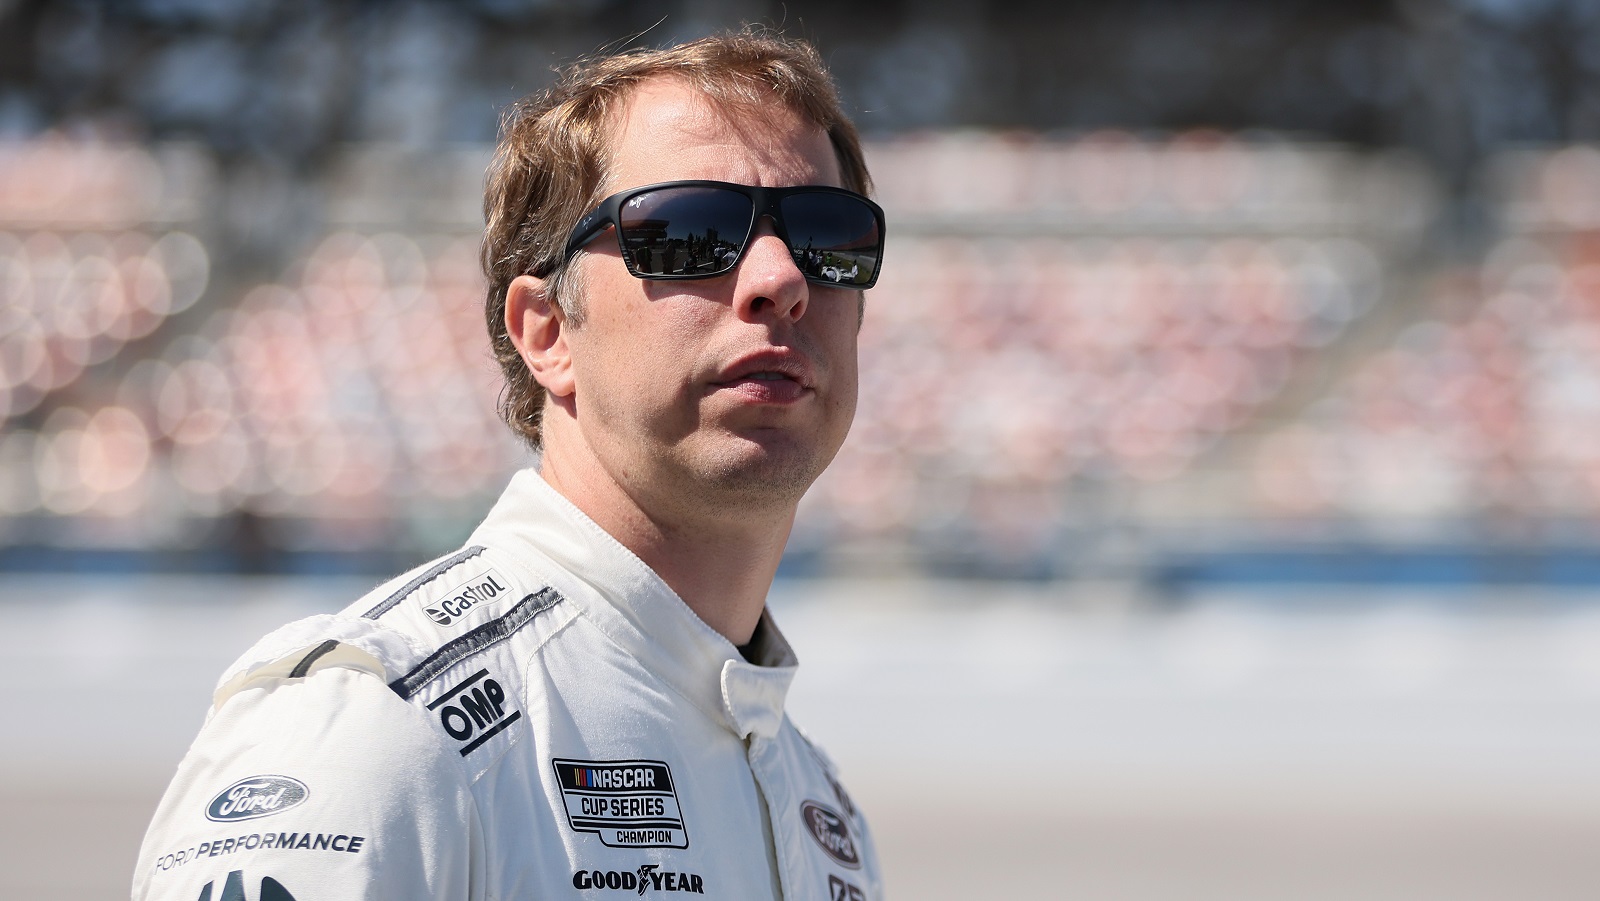 Brad Keselowski, driver of the No. 6 Ford, waits on the grid during qualifying for the NASCAR Cup Series GEICO 500 at Talladega Superspeedway on April 23, 2022. | James Gilbert/Getty Images